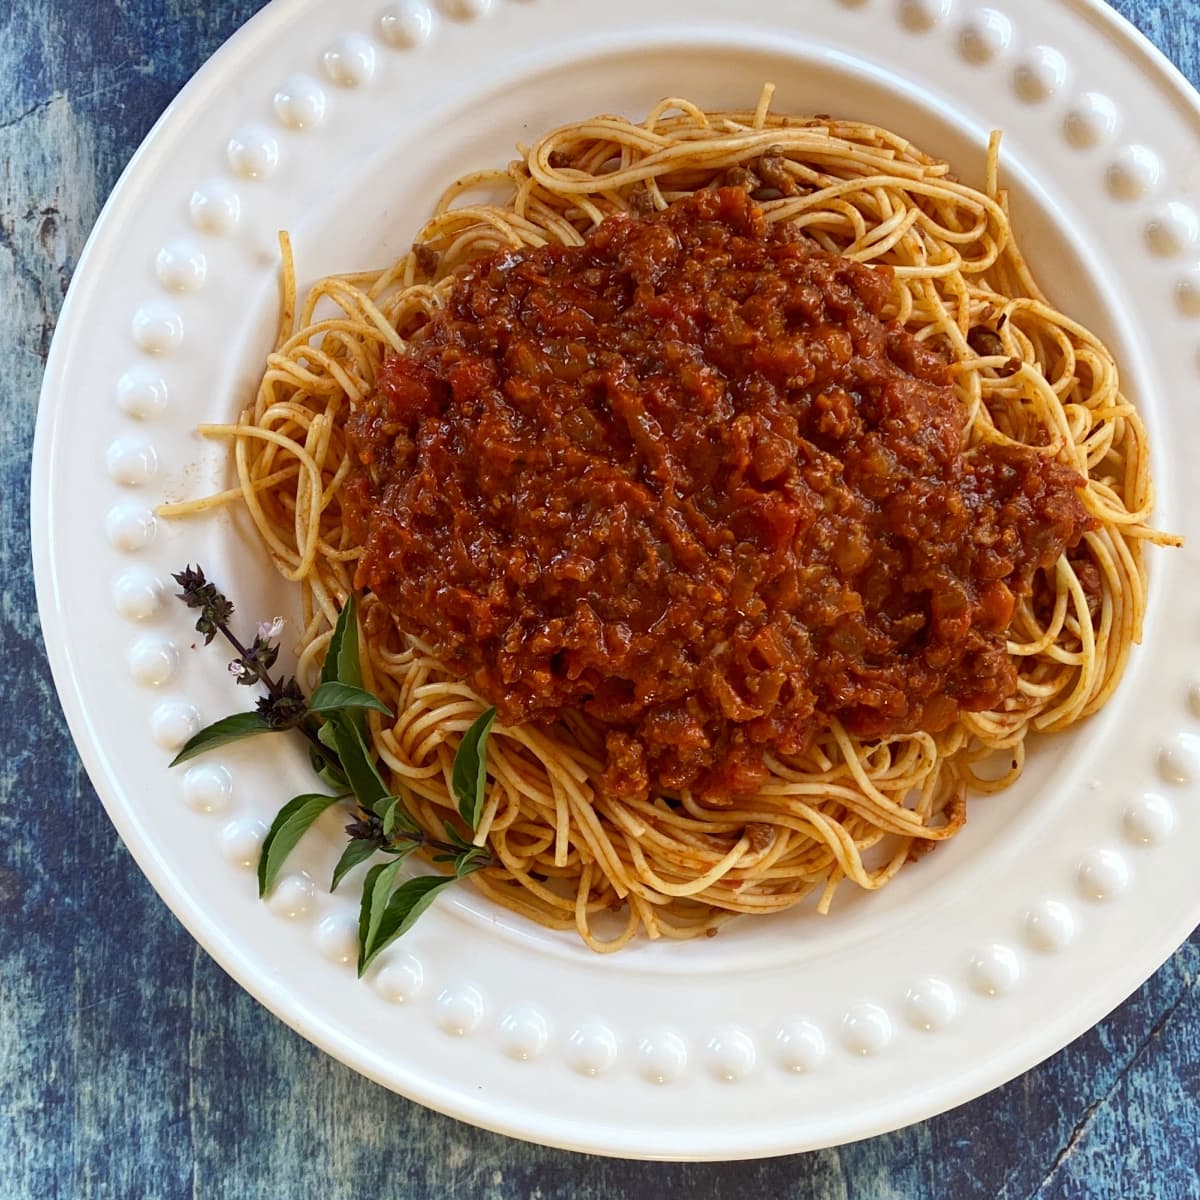 Meaty spaghetti sauce, served over thin spaghetti noodles on a large white plate.